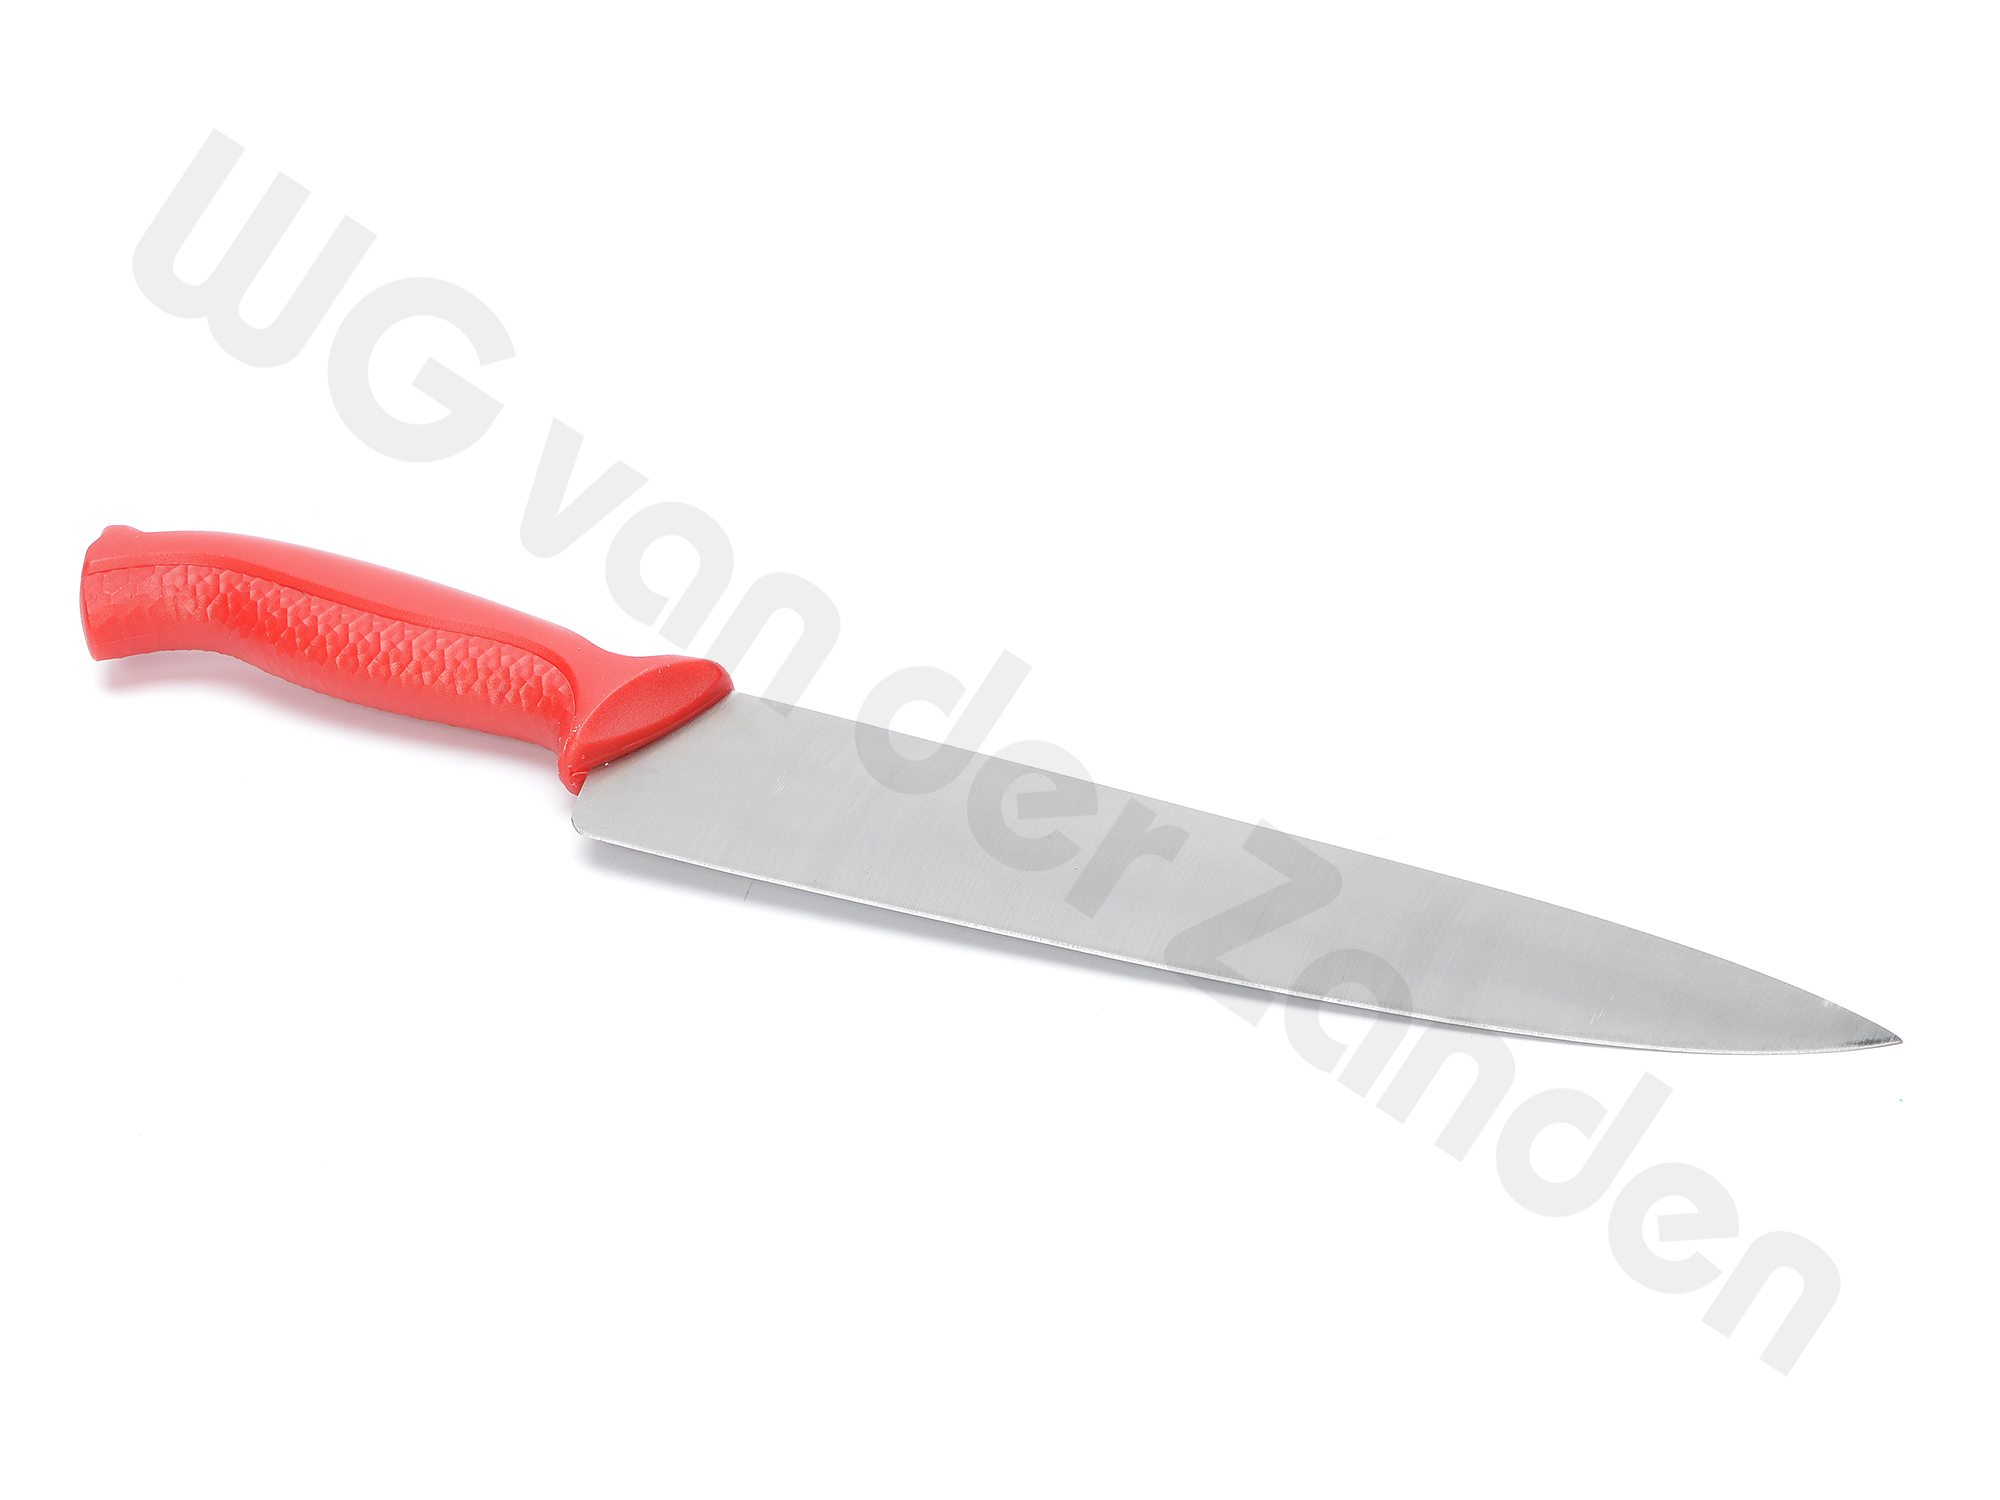 551532 CHEFS KNIFE 25CM RED HANDLE